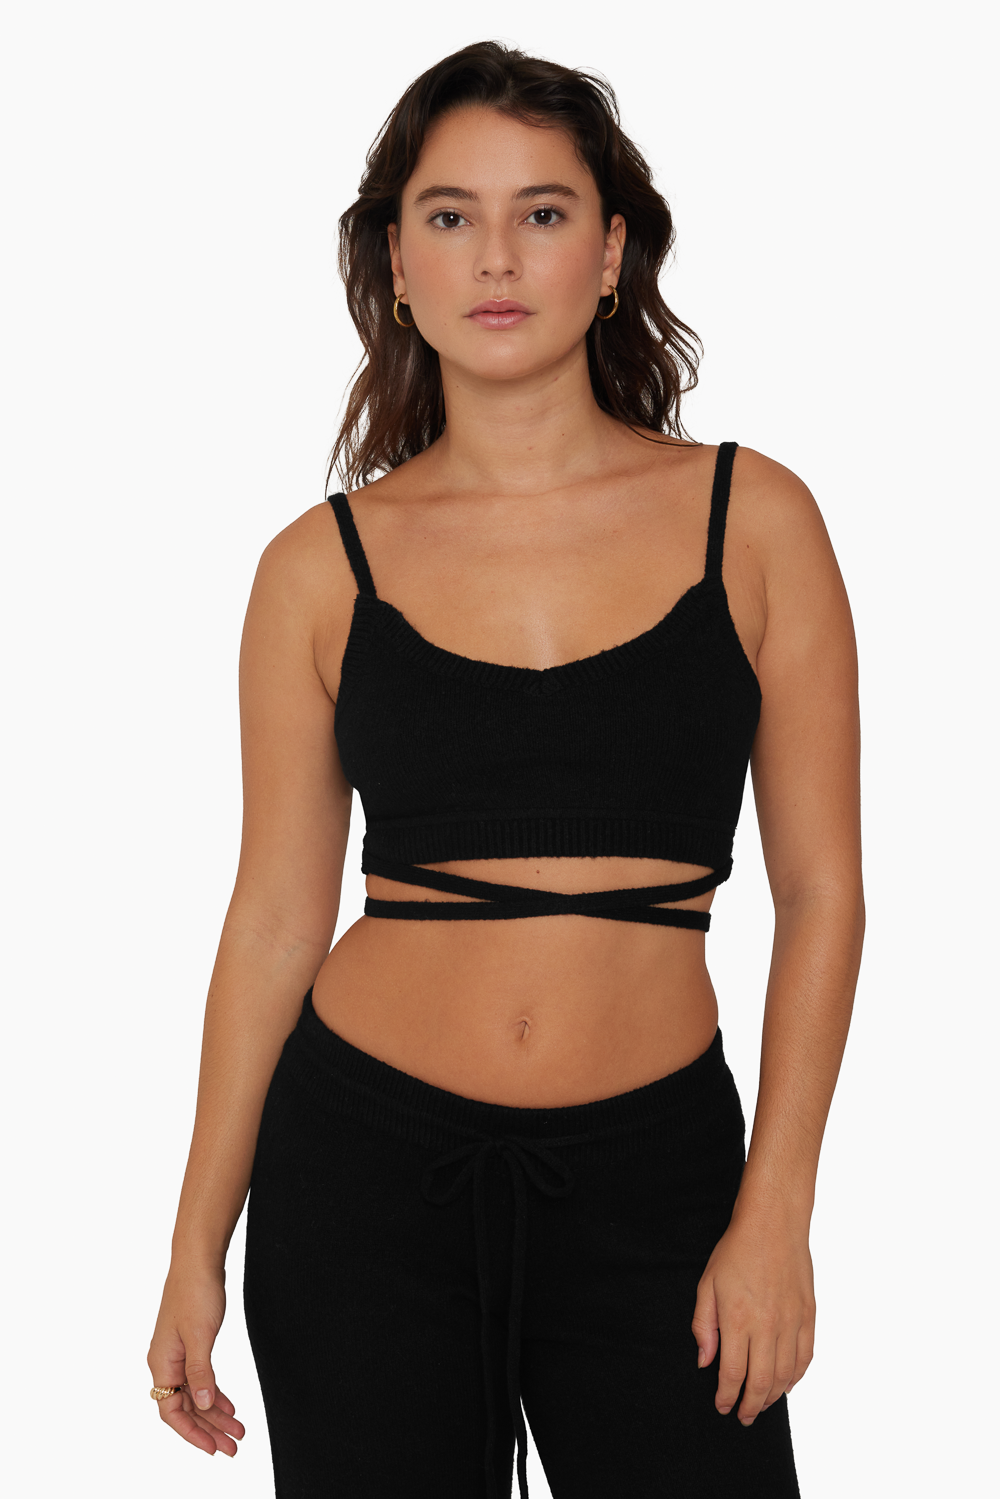 JERSEY KNIT WRAP BRALETTE - ONYX Featured Image